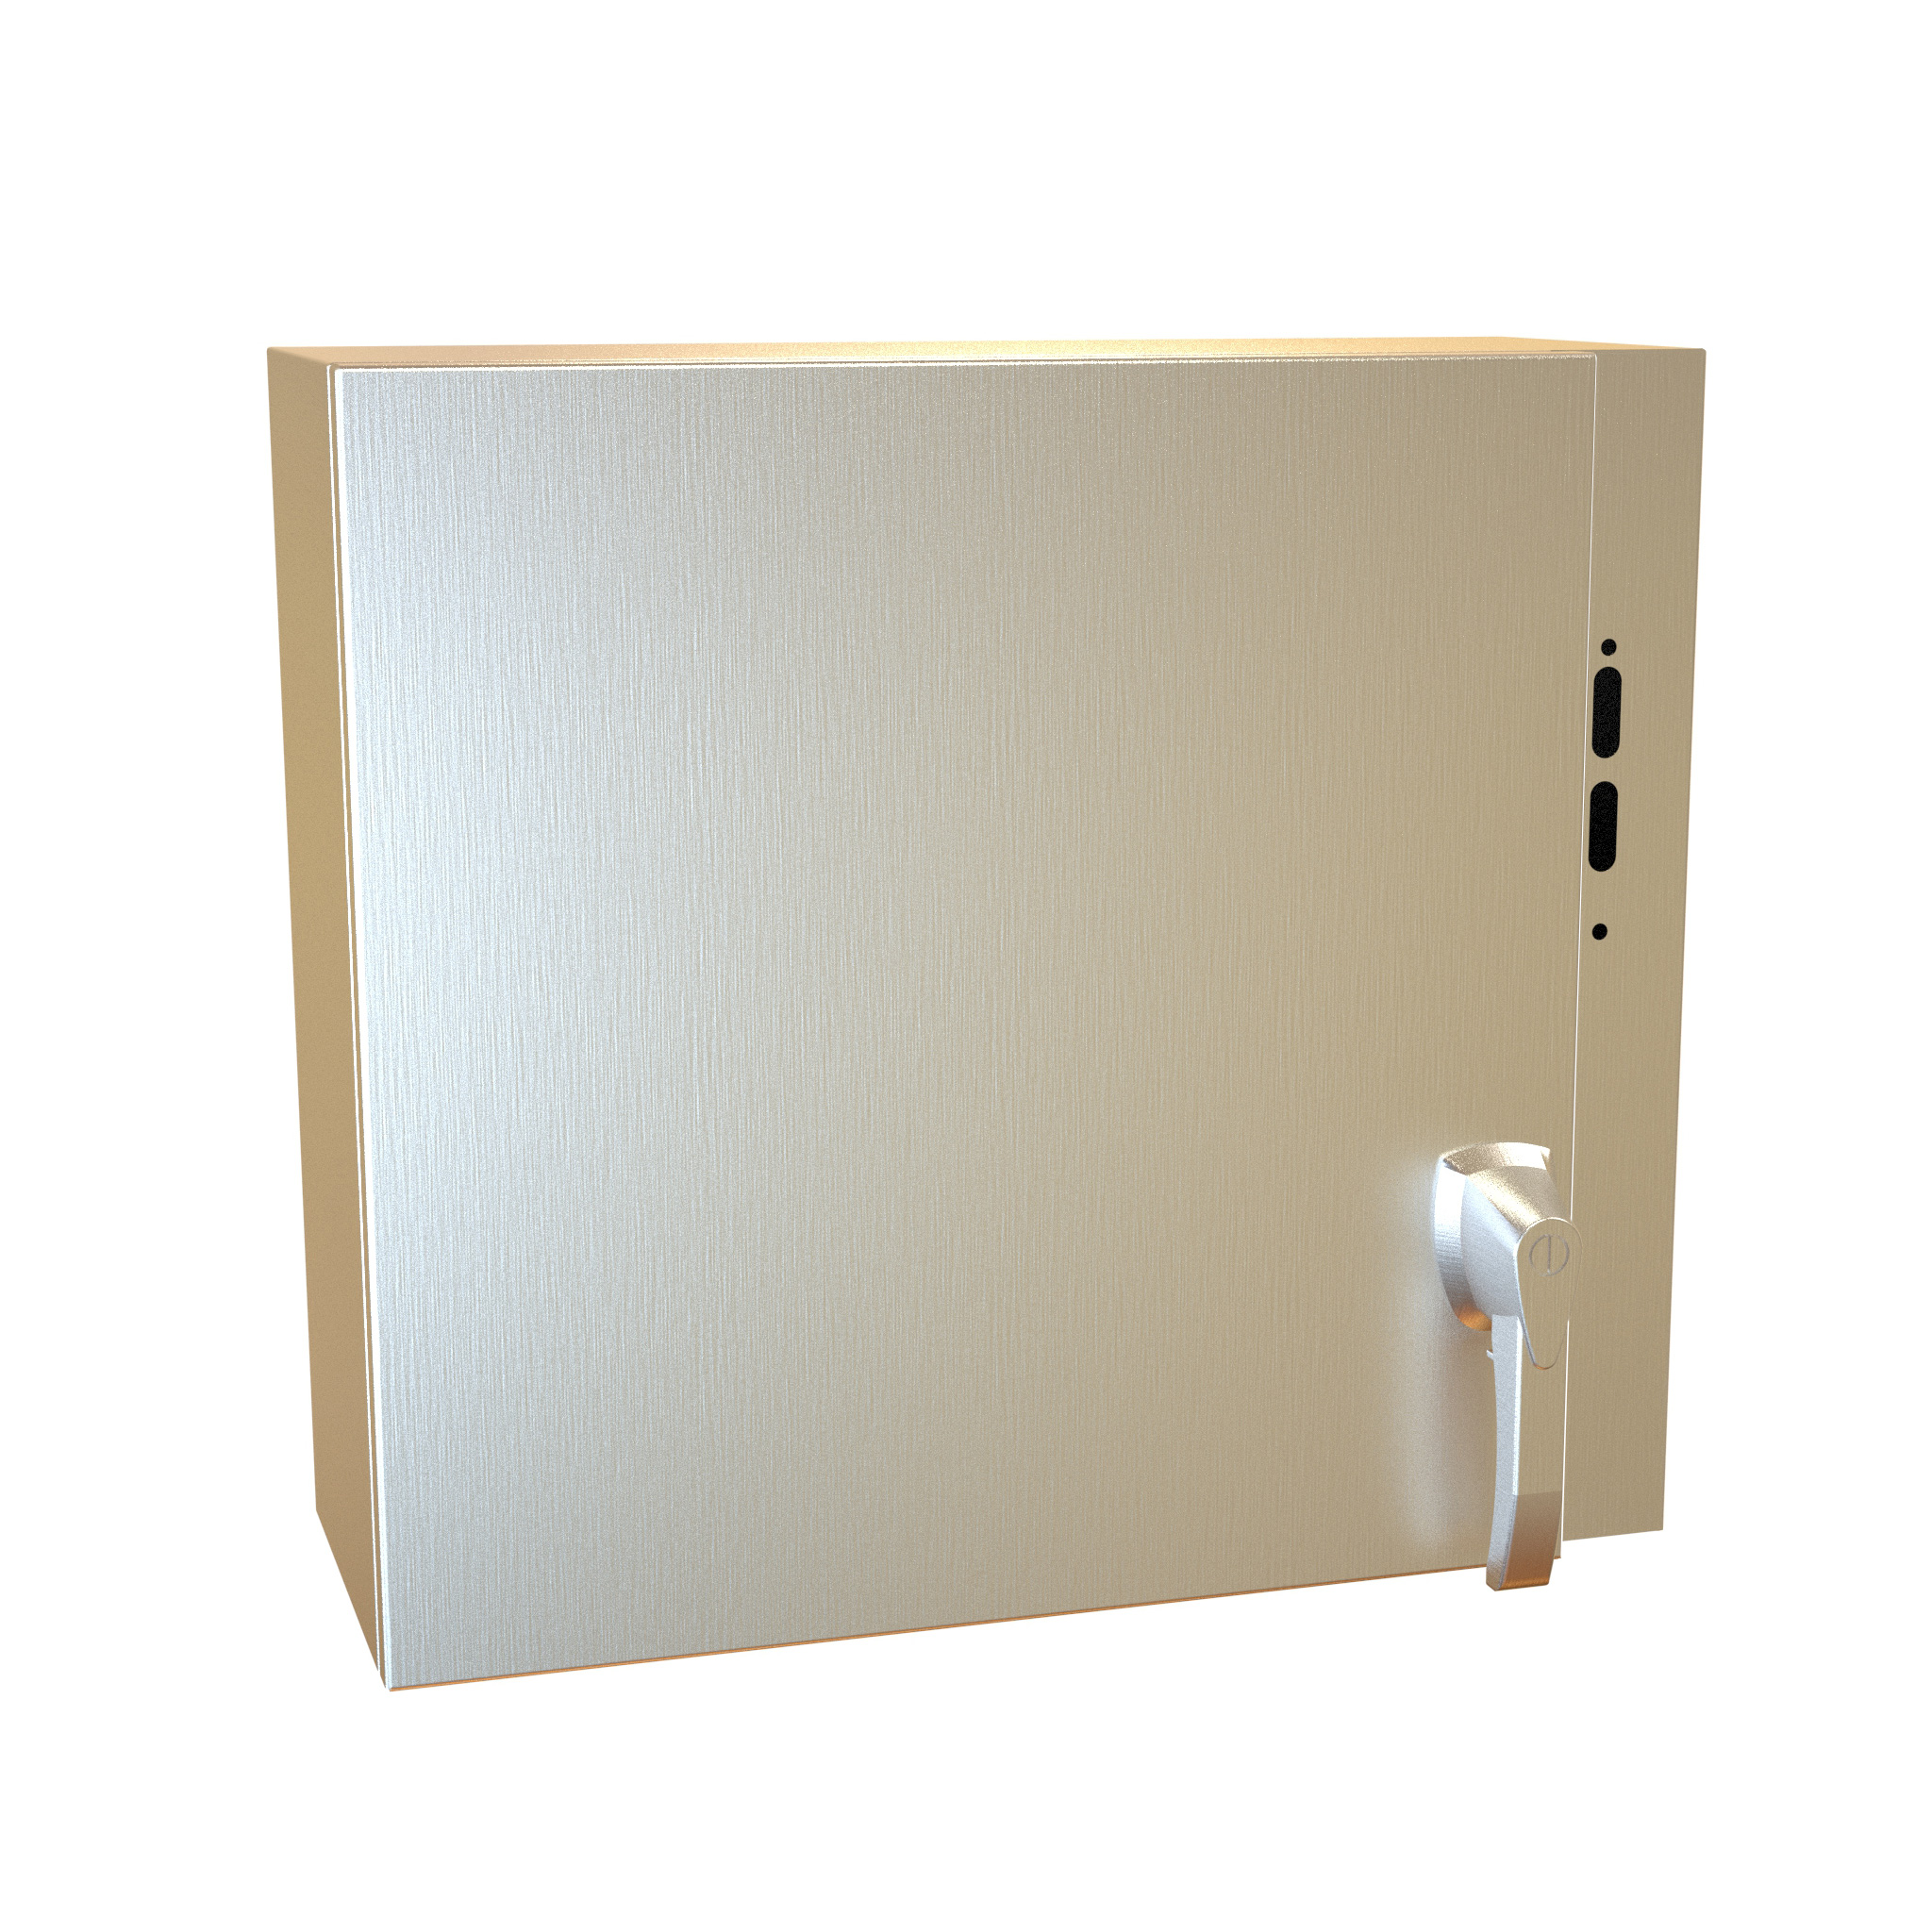 Hammond Manufacturing - Type 4X Stainless Steel Wallmount Disconnect Enclosure